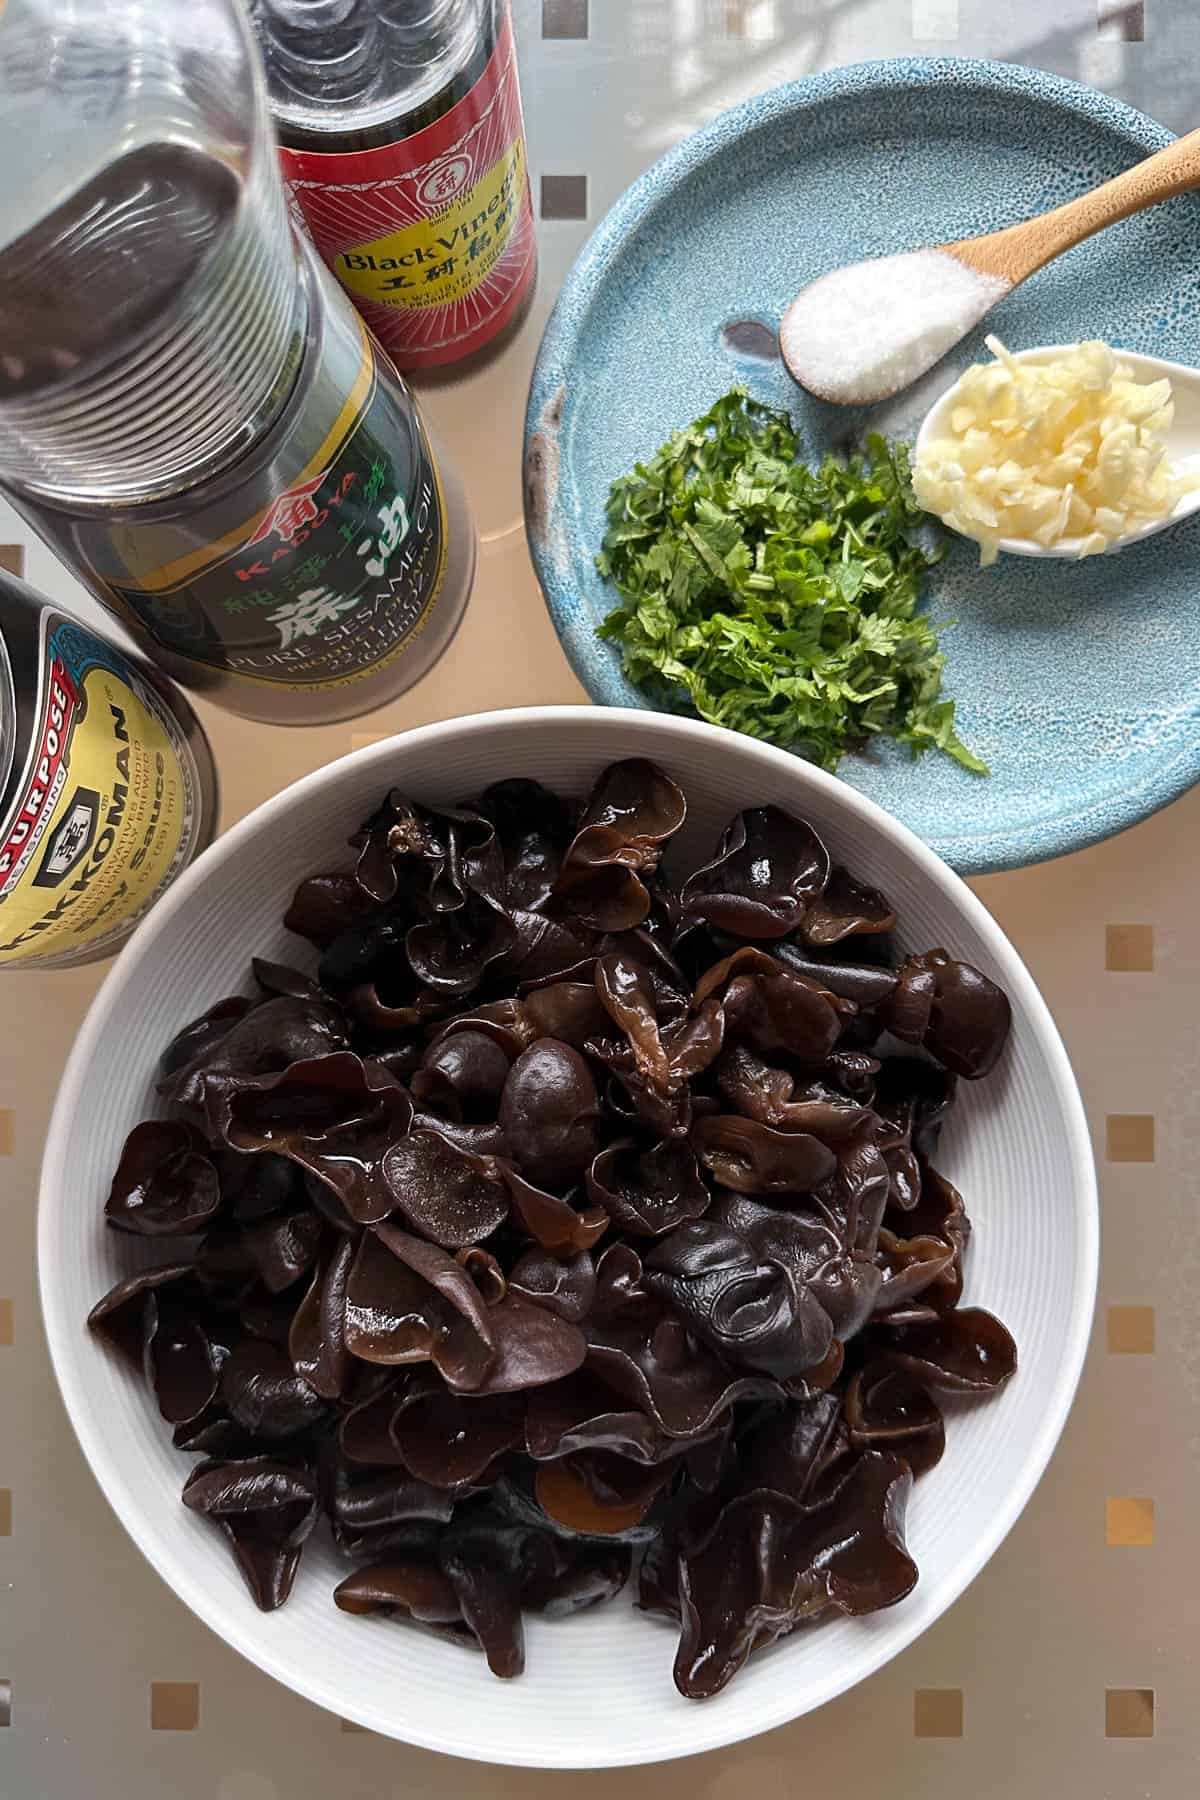 Ingredients for Wood Ear Mushroom Salad on a table (wood ear msuhrooms, garlic, black vinegar, soy sauce, sesame oil, soy sauce, and cilantro).